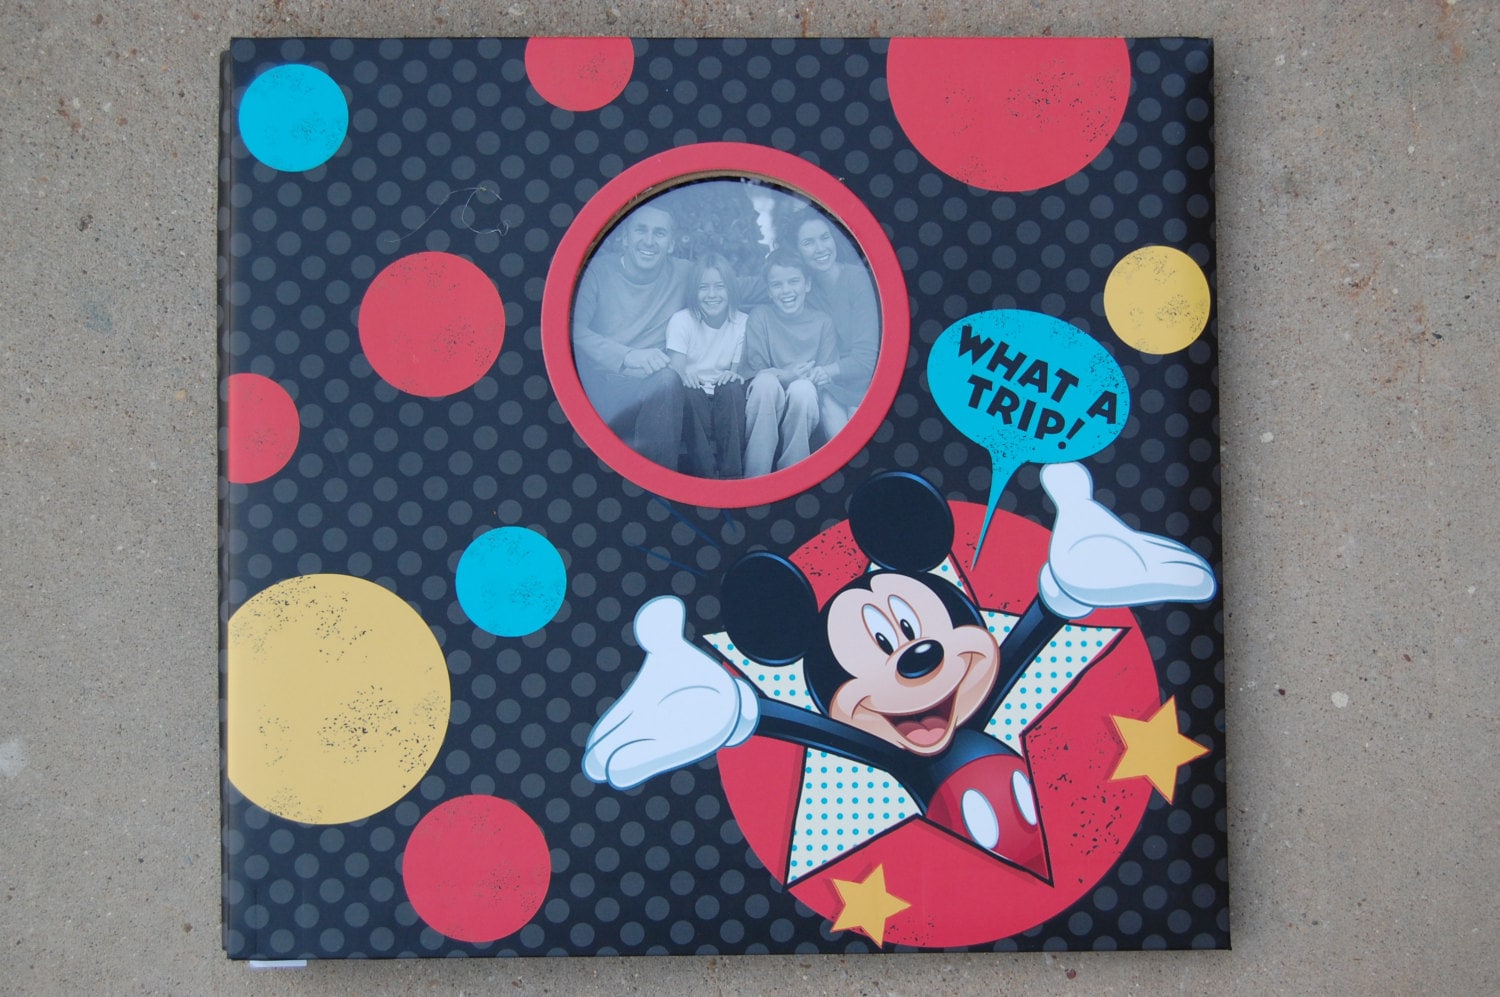 Mickey and Minnie Mouse Disney Scrapbooking paper  Disney scrapbook,  Disney scrapbooking layouts, Disney scrapbook pages